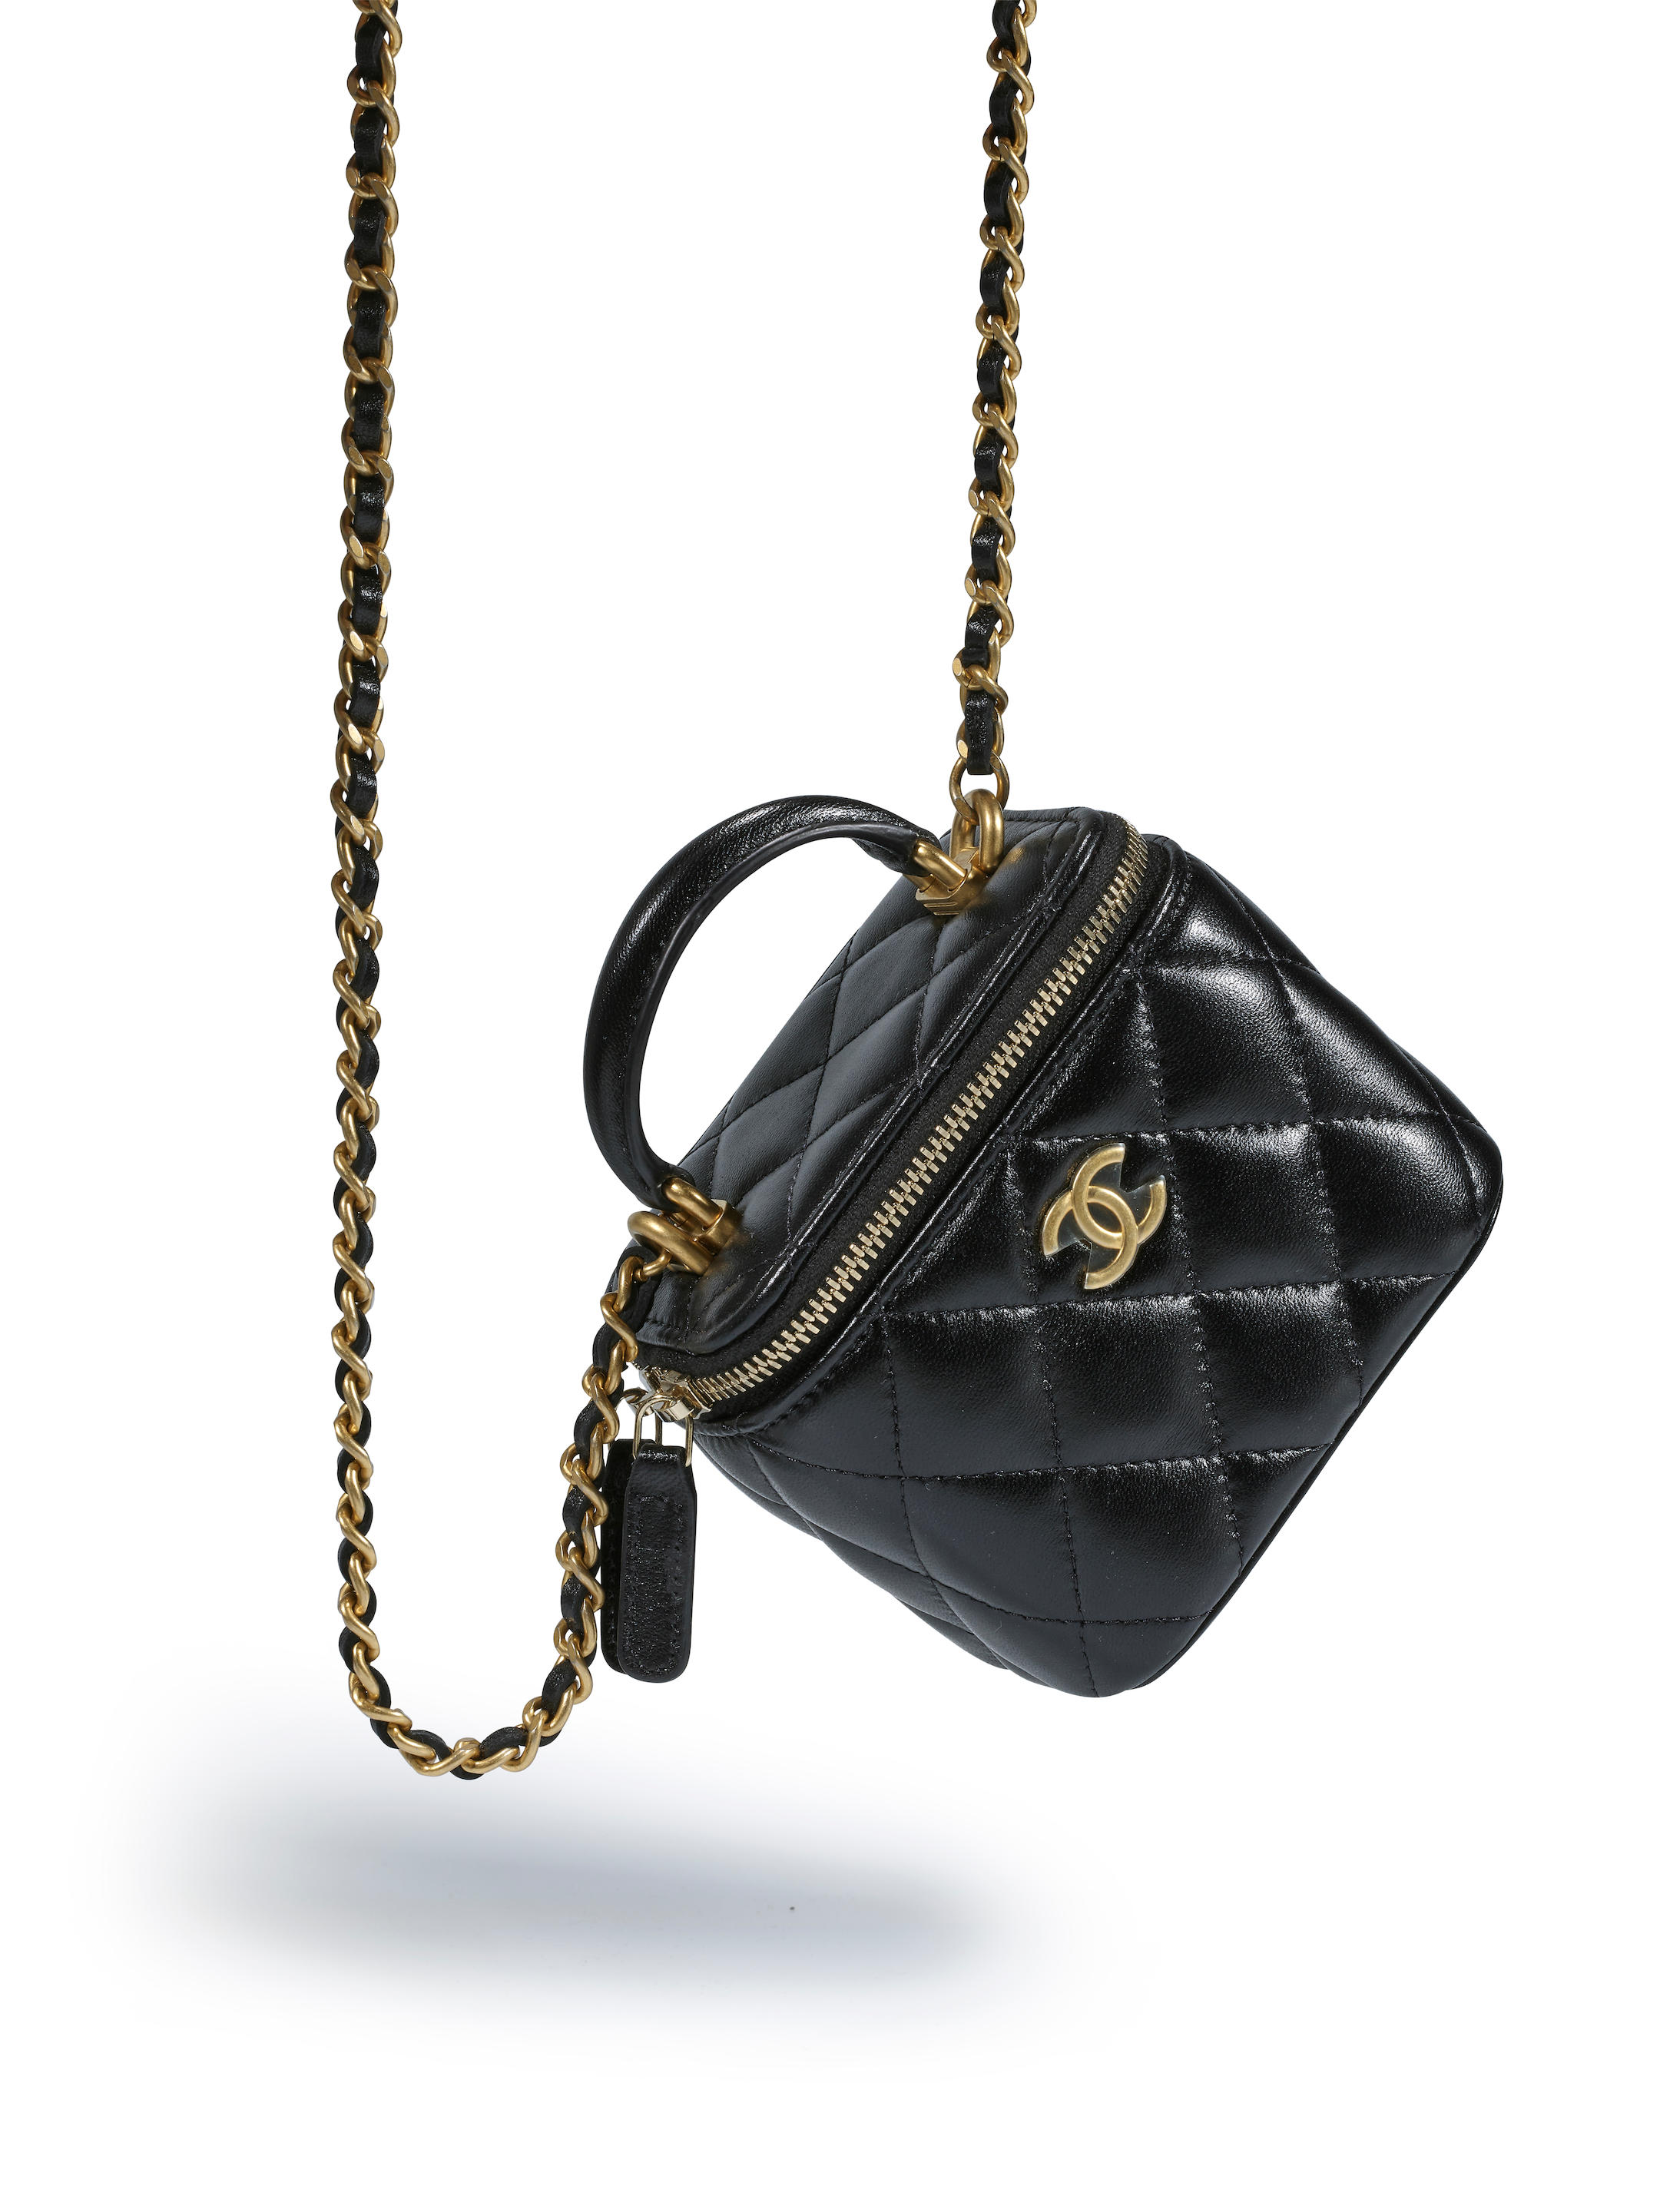 CHANEL BLACK LAMBSKIN SMALL VANITY CASE WITH TOP HANDLE GOLD TONED CHAIN  (Includes info booklet, authenticity card, original dust bag and original  box) - Bonhams